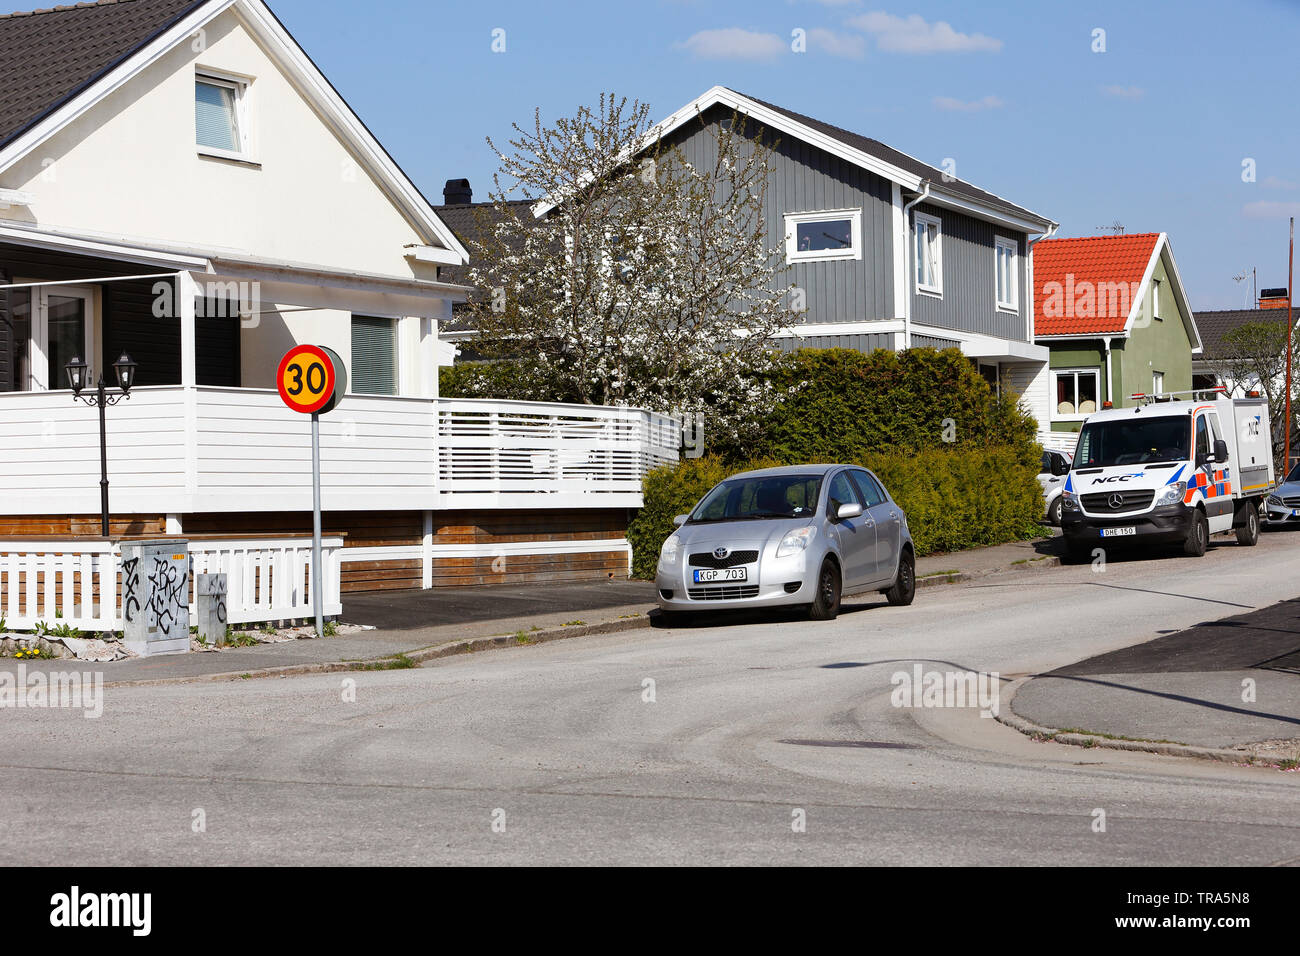 Orebro, Sweden - April 26, 2019: View of a residential area populated with single family houses. Stock Photo